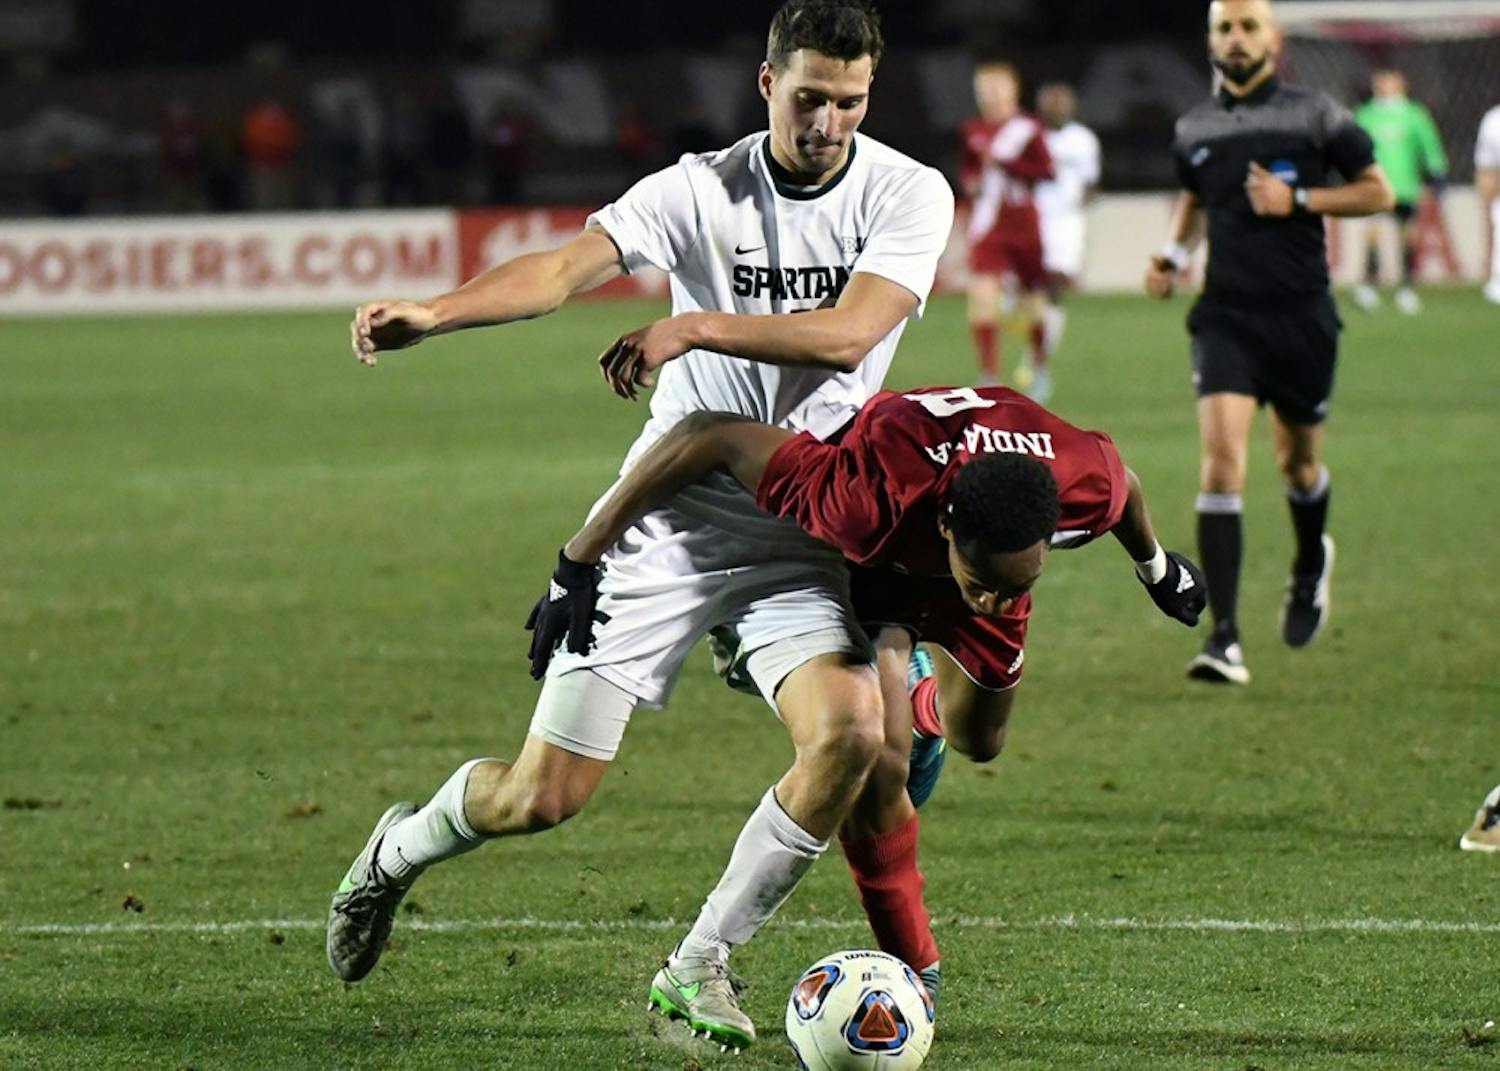 GALLERY: IU men's soccer advances to its 19th College Cup